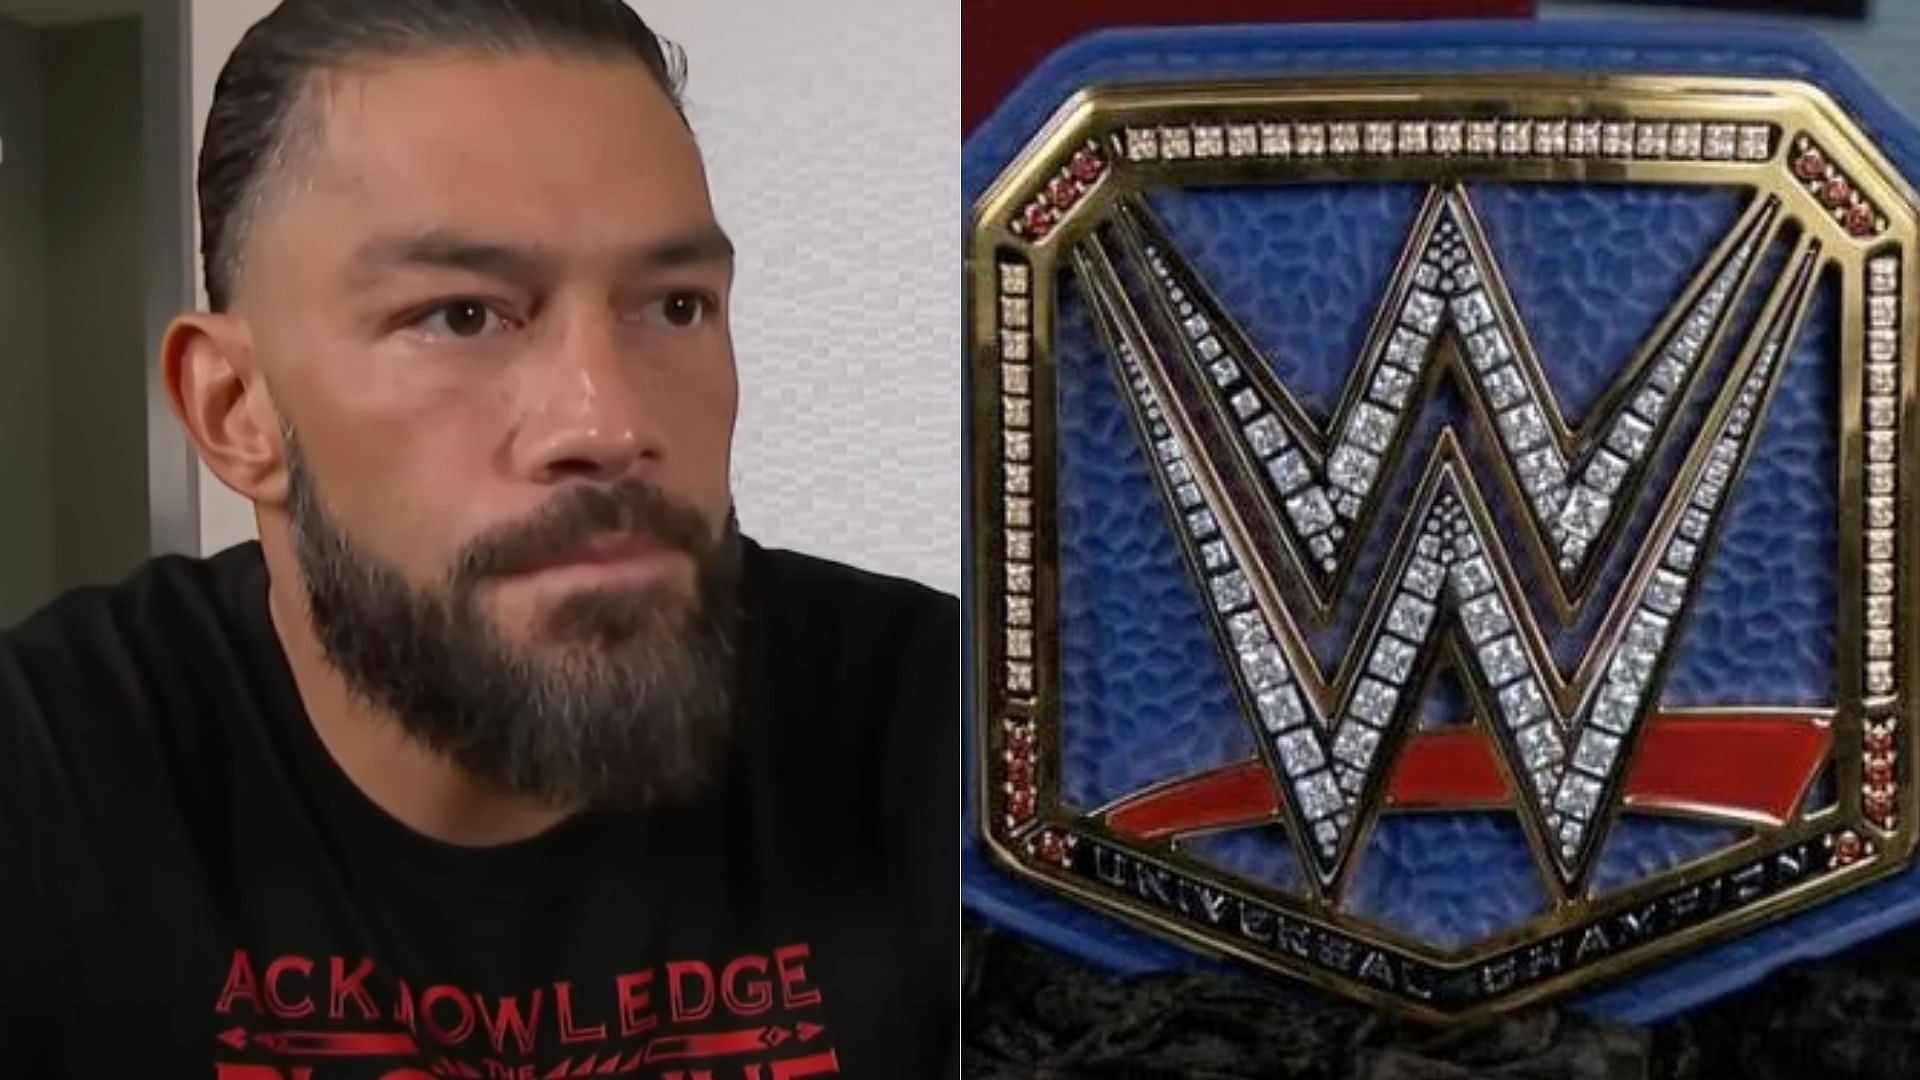 Roman Reigns currently holds the Universal and WWE Championships.